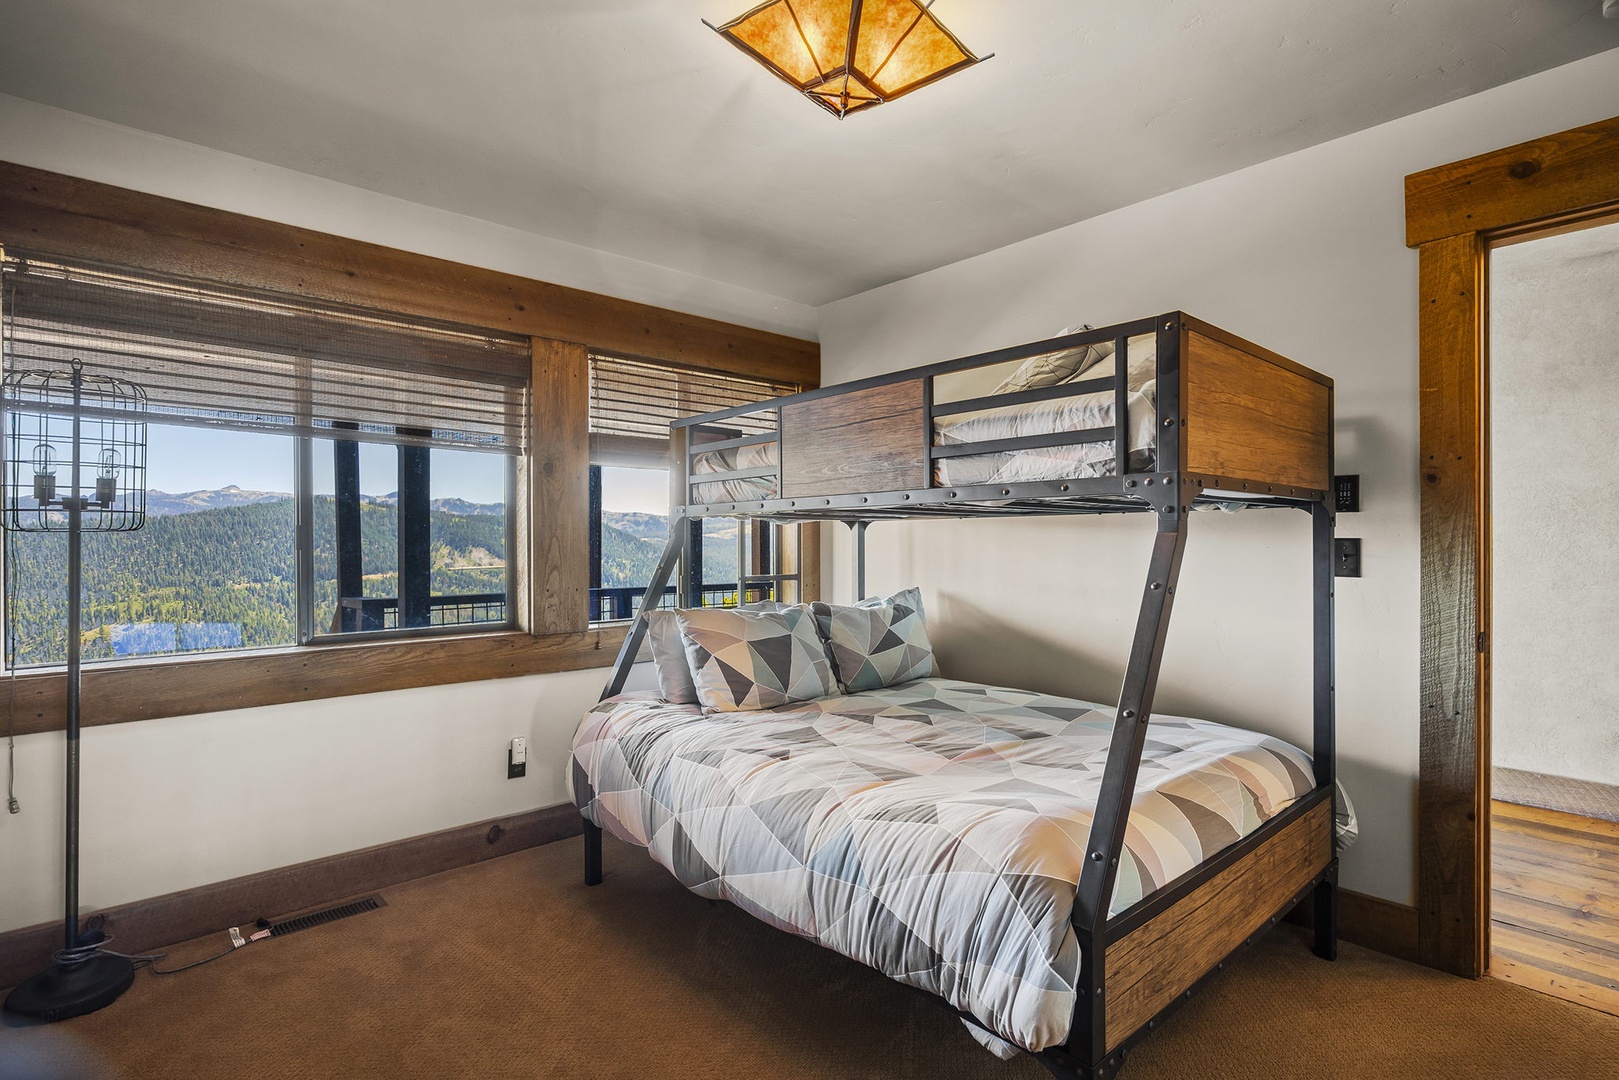 Bunk room: Lakeview Mountaintop Chateau